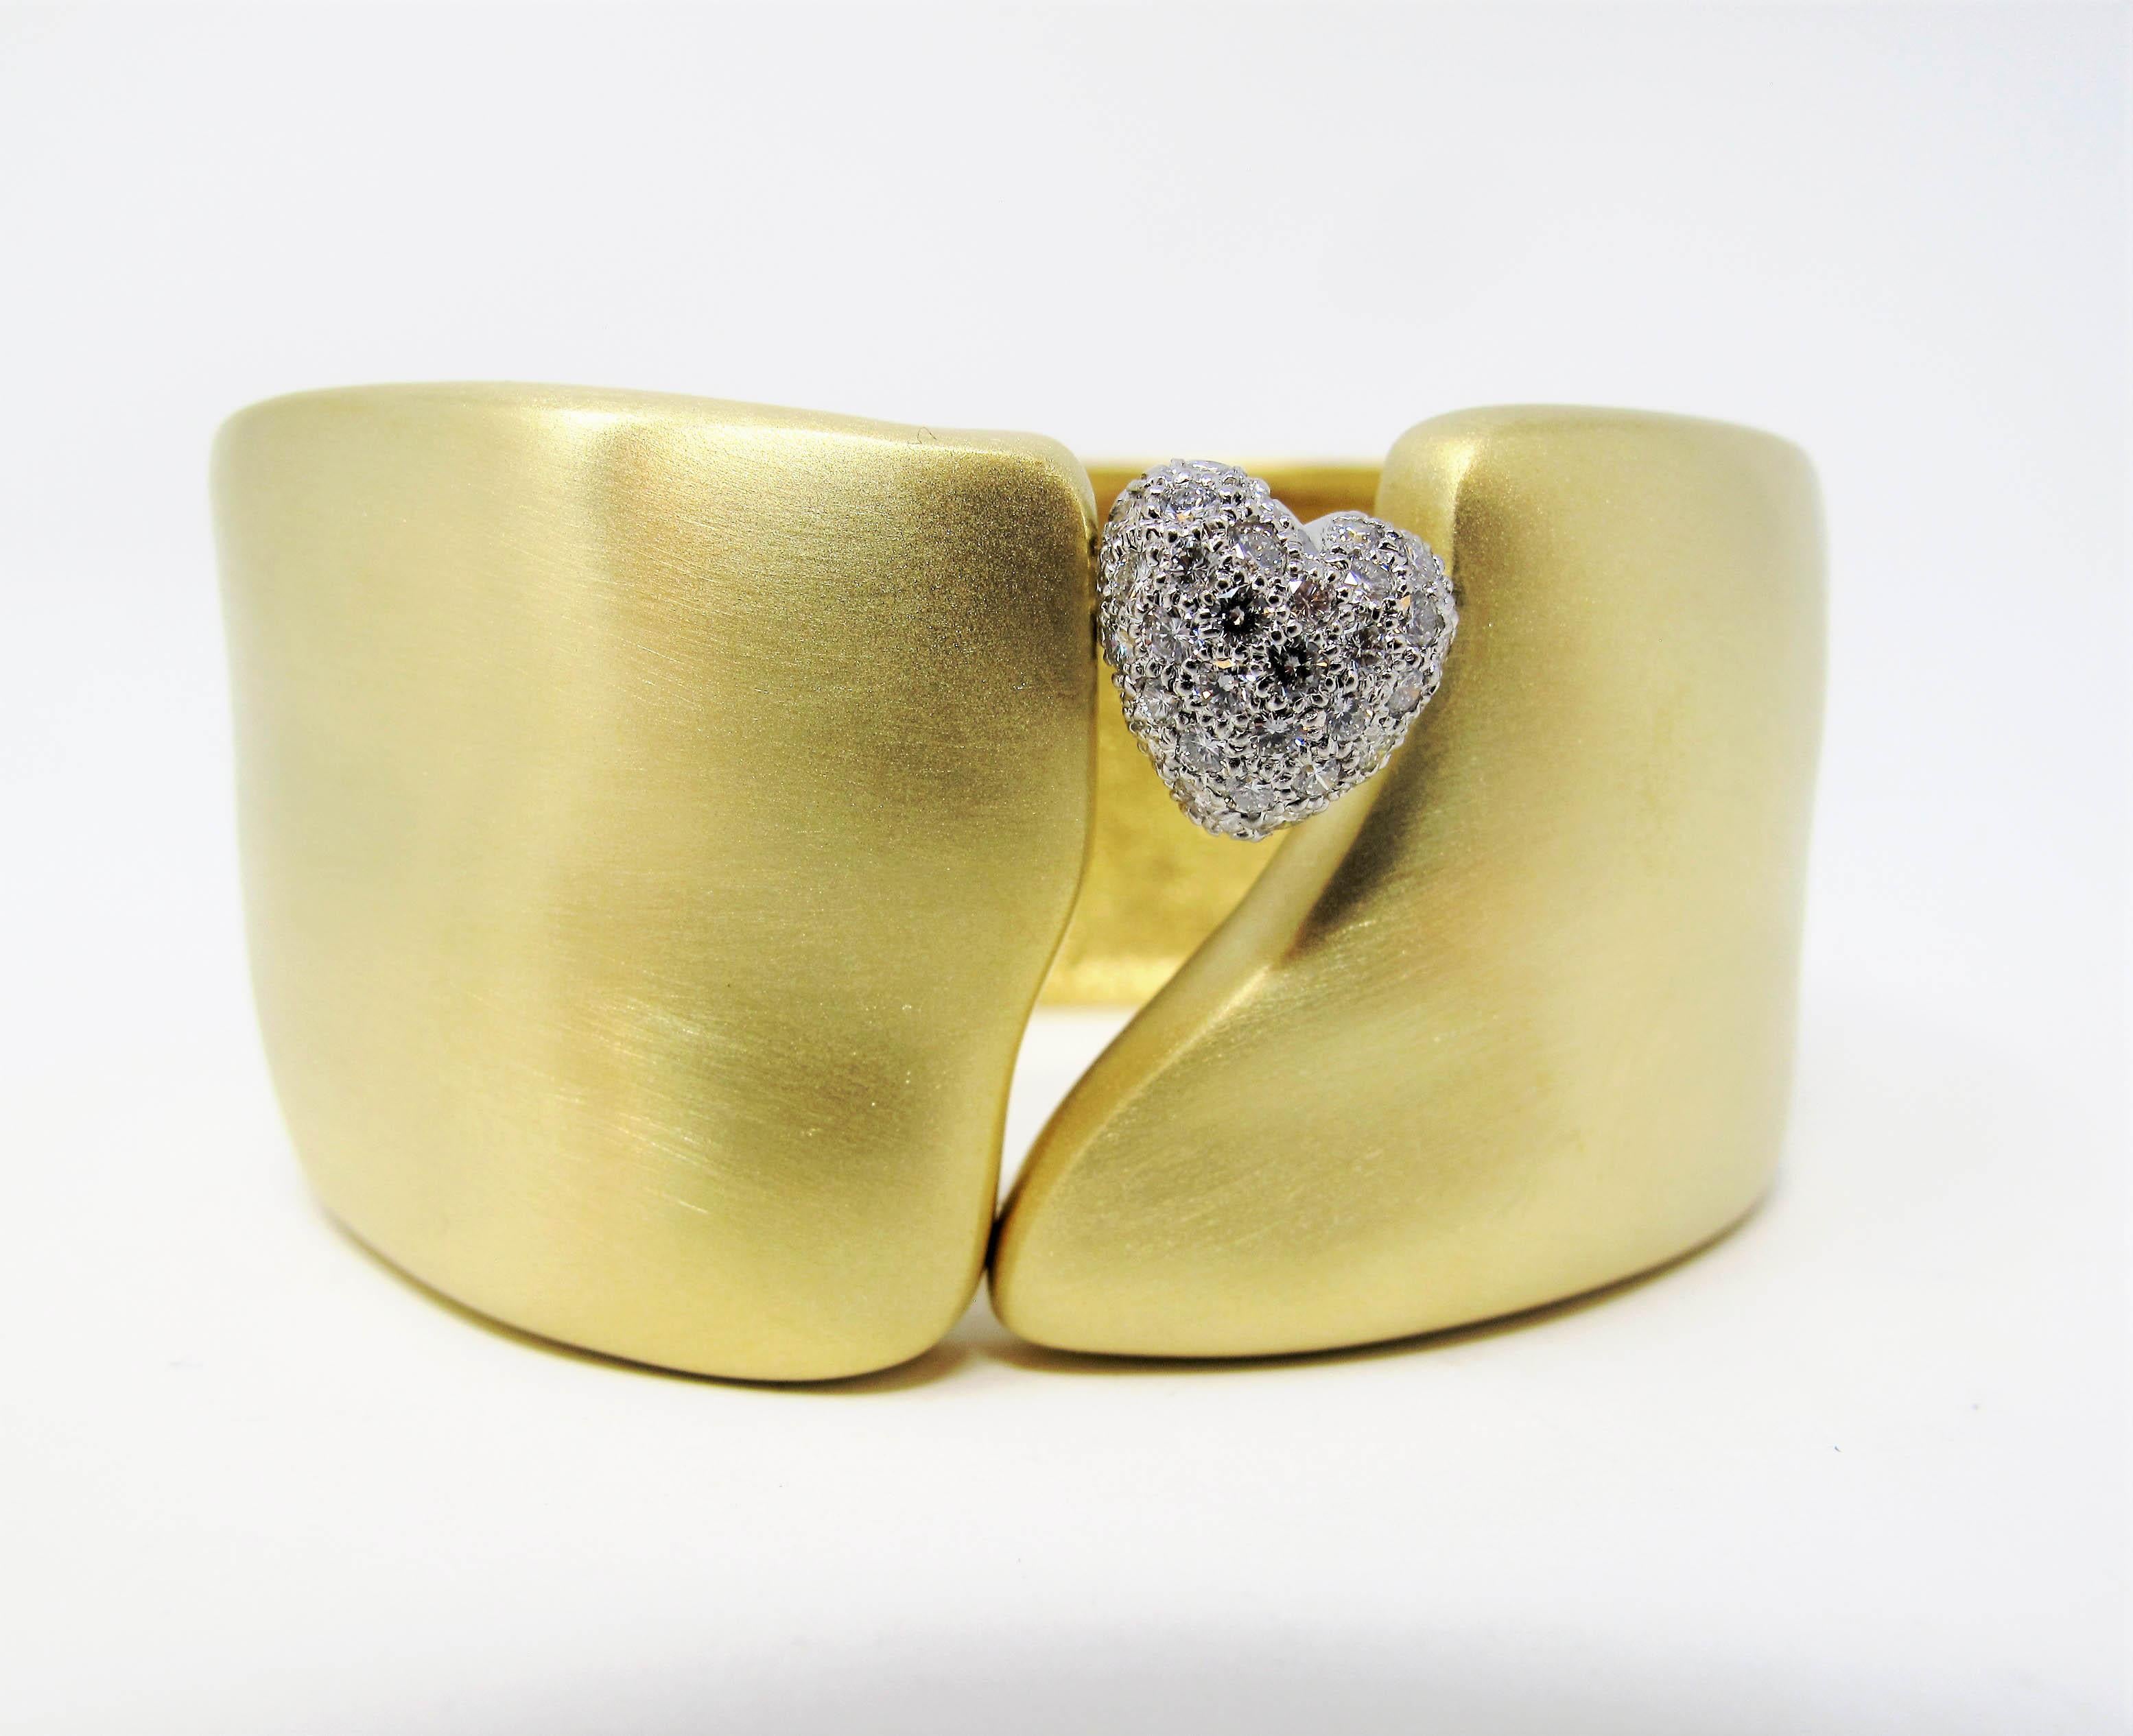 This bold, contemporary statement piece fills the wrist with understated sophistication. The incredible cuff bracelet has a subtle hammered design in a brushed gold finish, accented by a single glittering pave diamond heart. The sleek, modern design